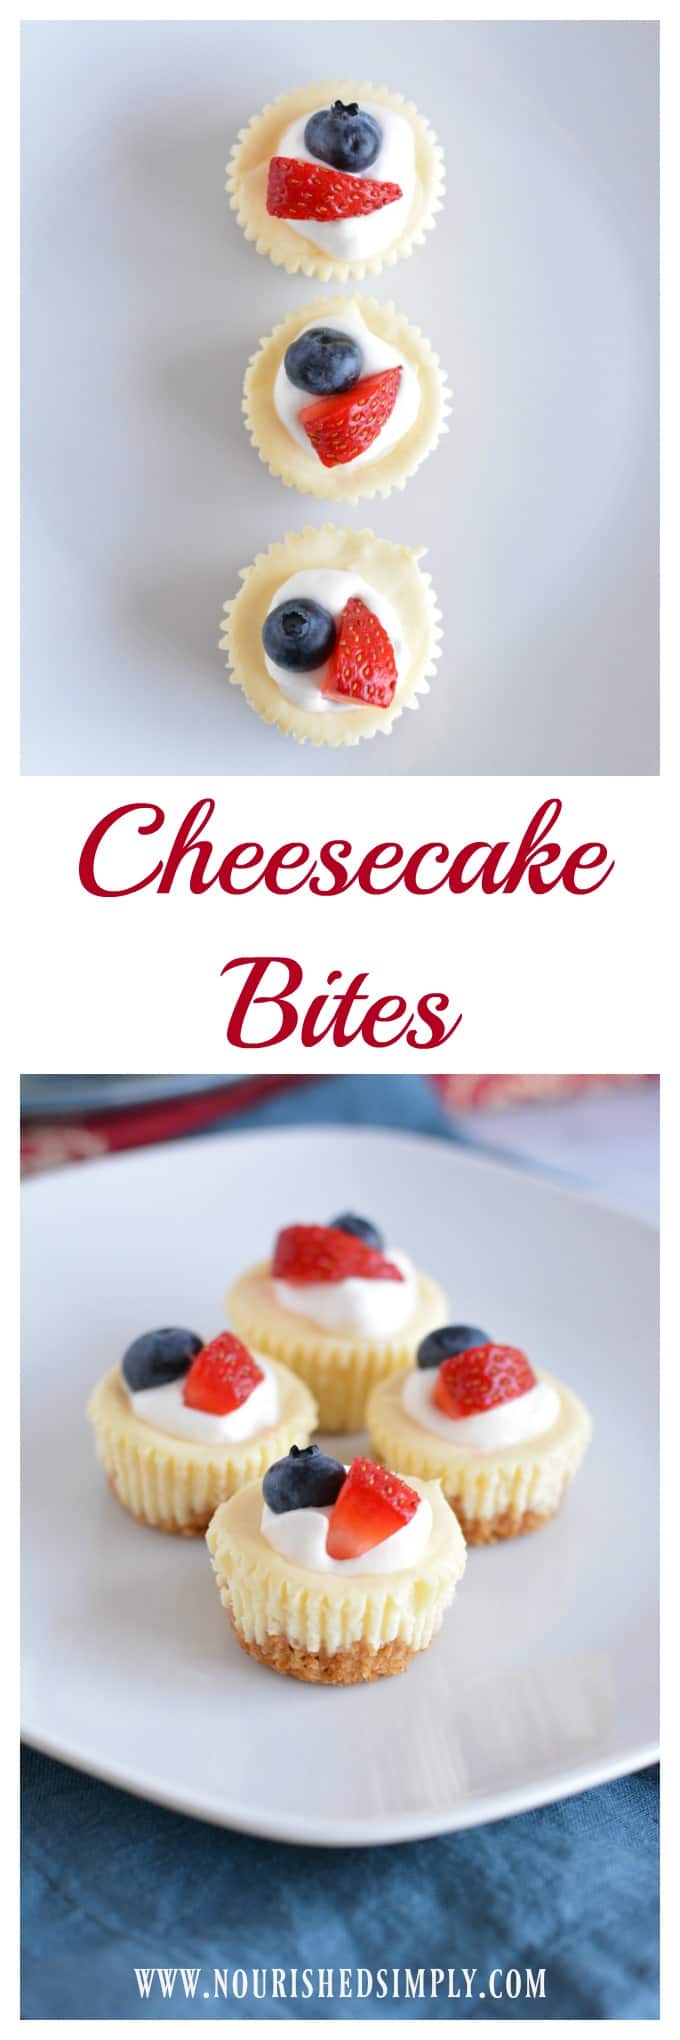 Small bite desserts like these cheesecake bites are perfect for the dessert lover who can't choose between just one dessert.